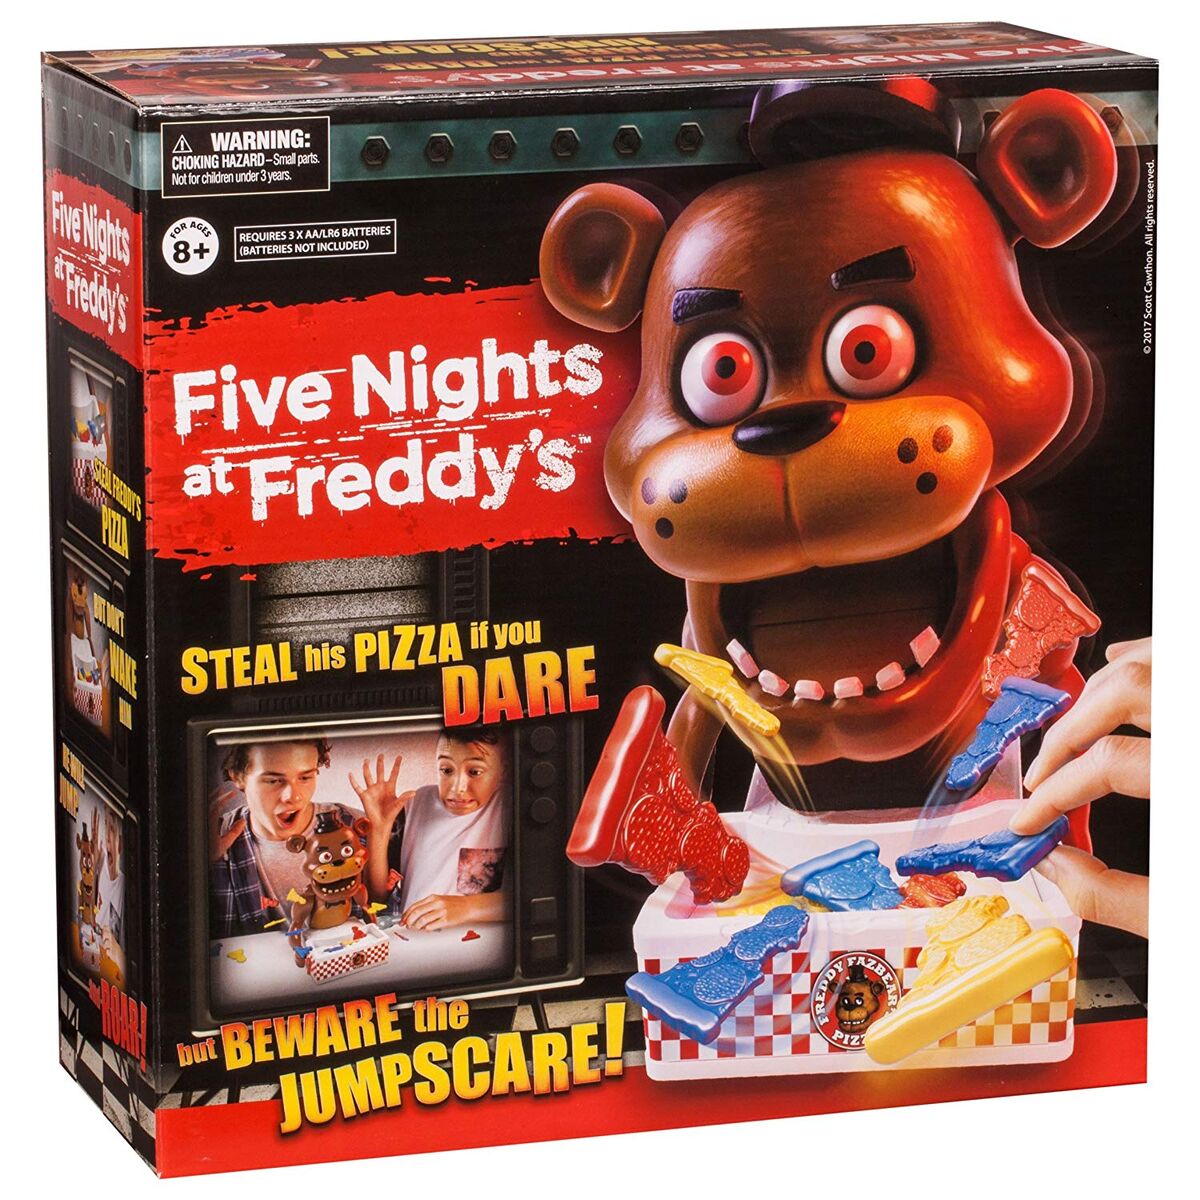 Buy Five Nights at Freddy's Scare-In-The-Box Game at Funko.